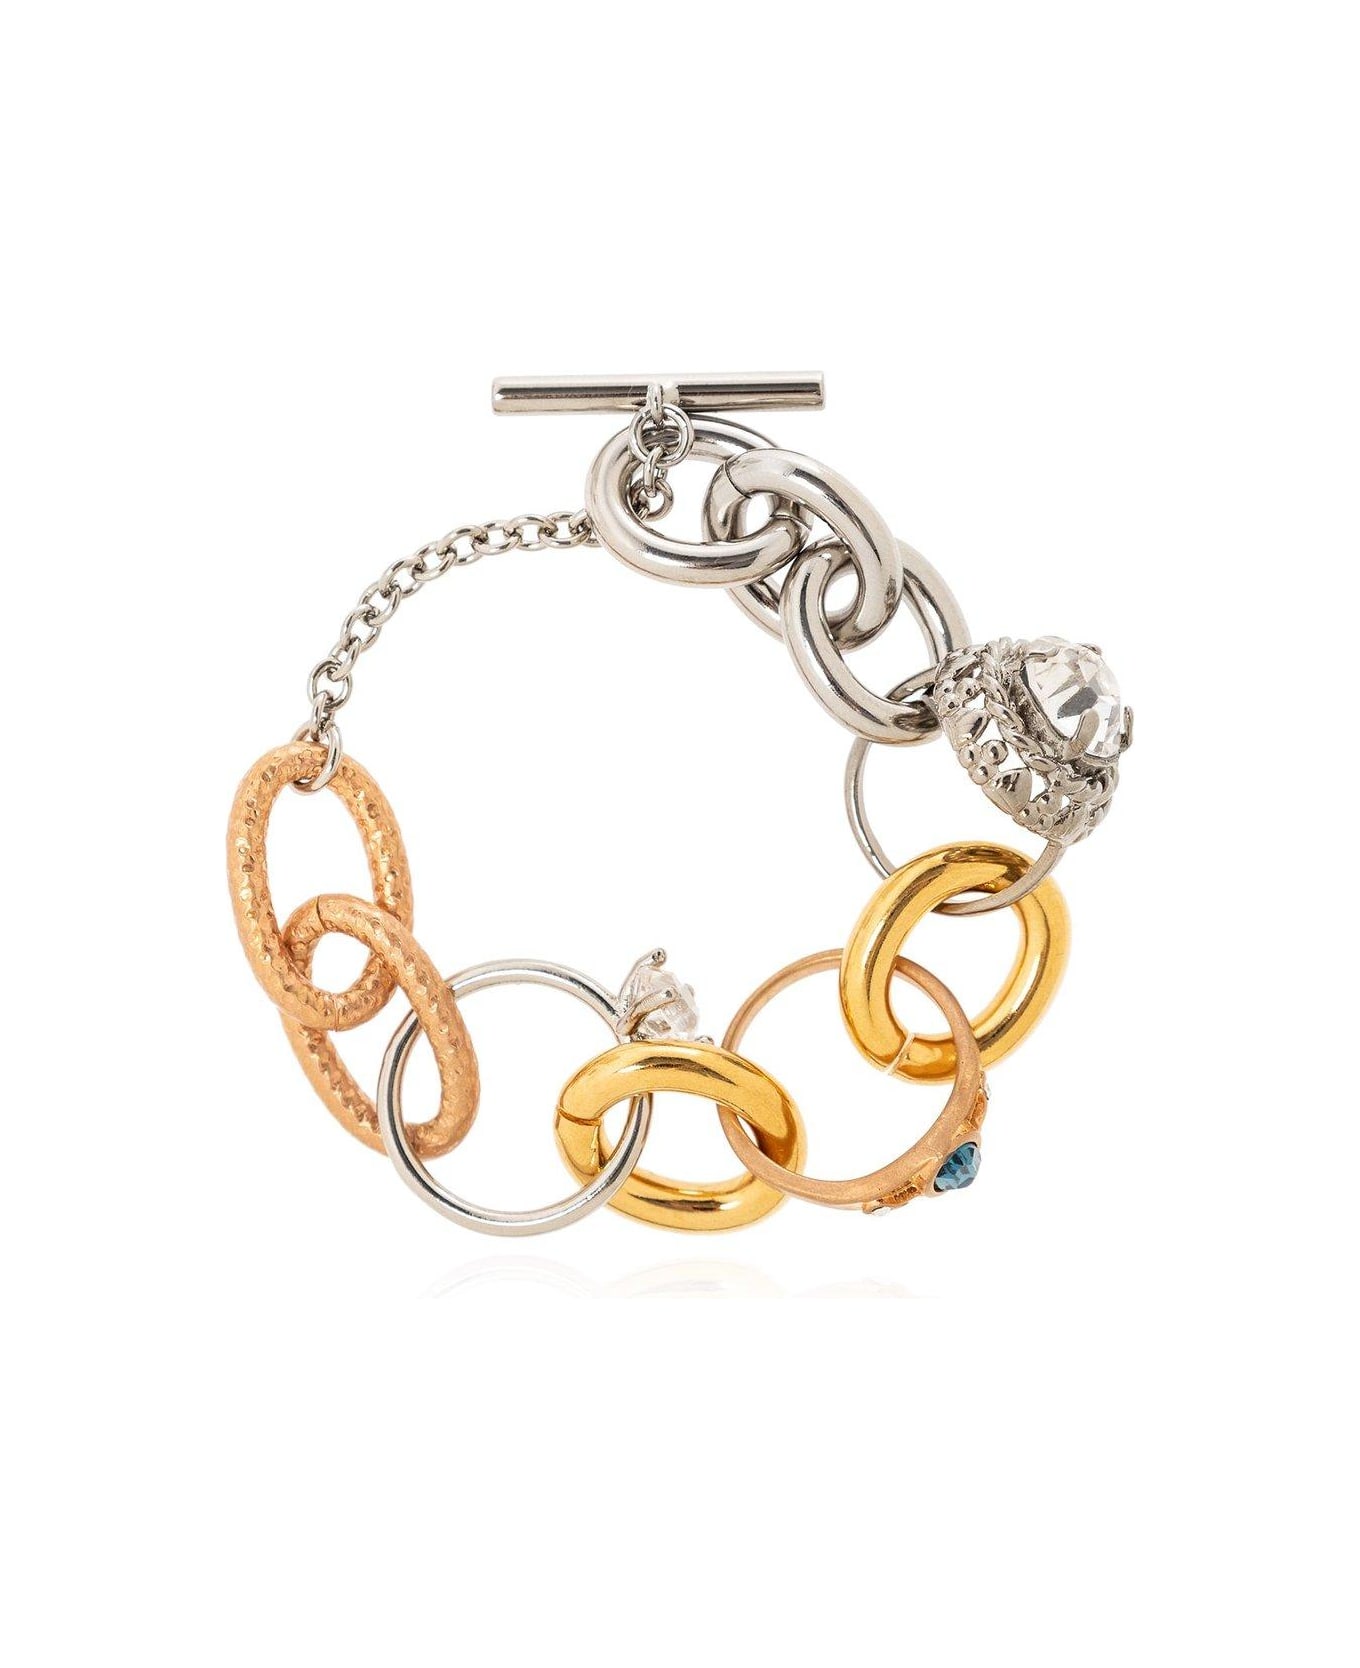 Marni Two-toned Ring Charm Bracelet - Golden ブレスレット